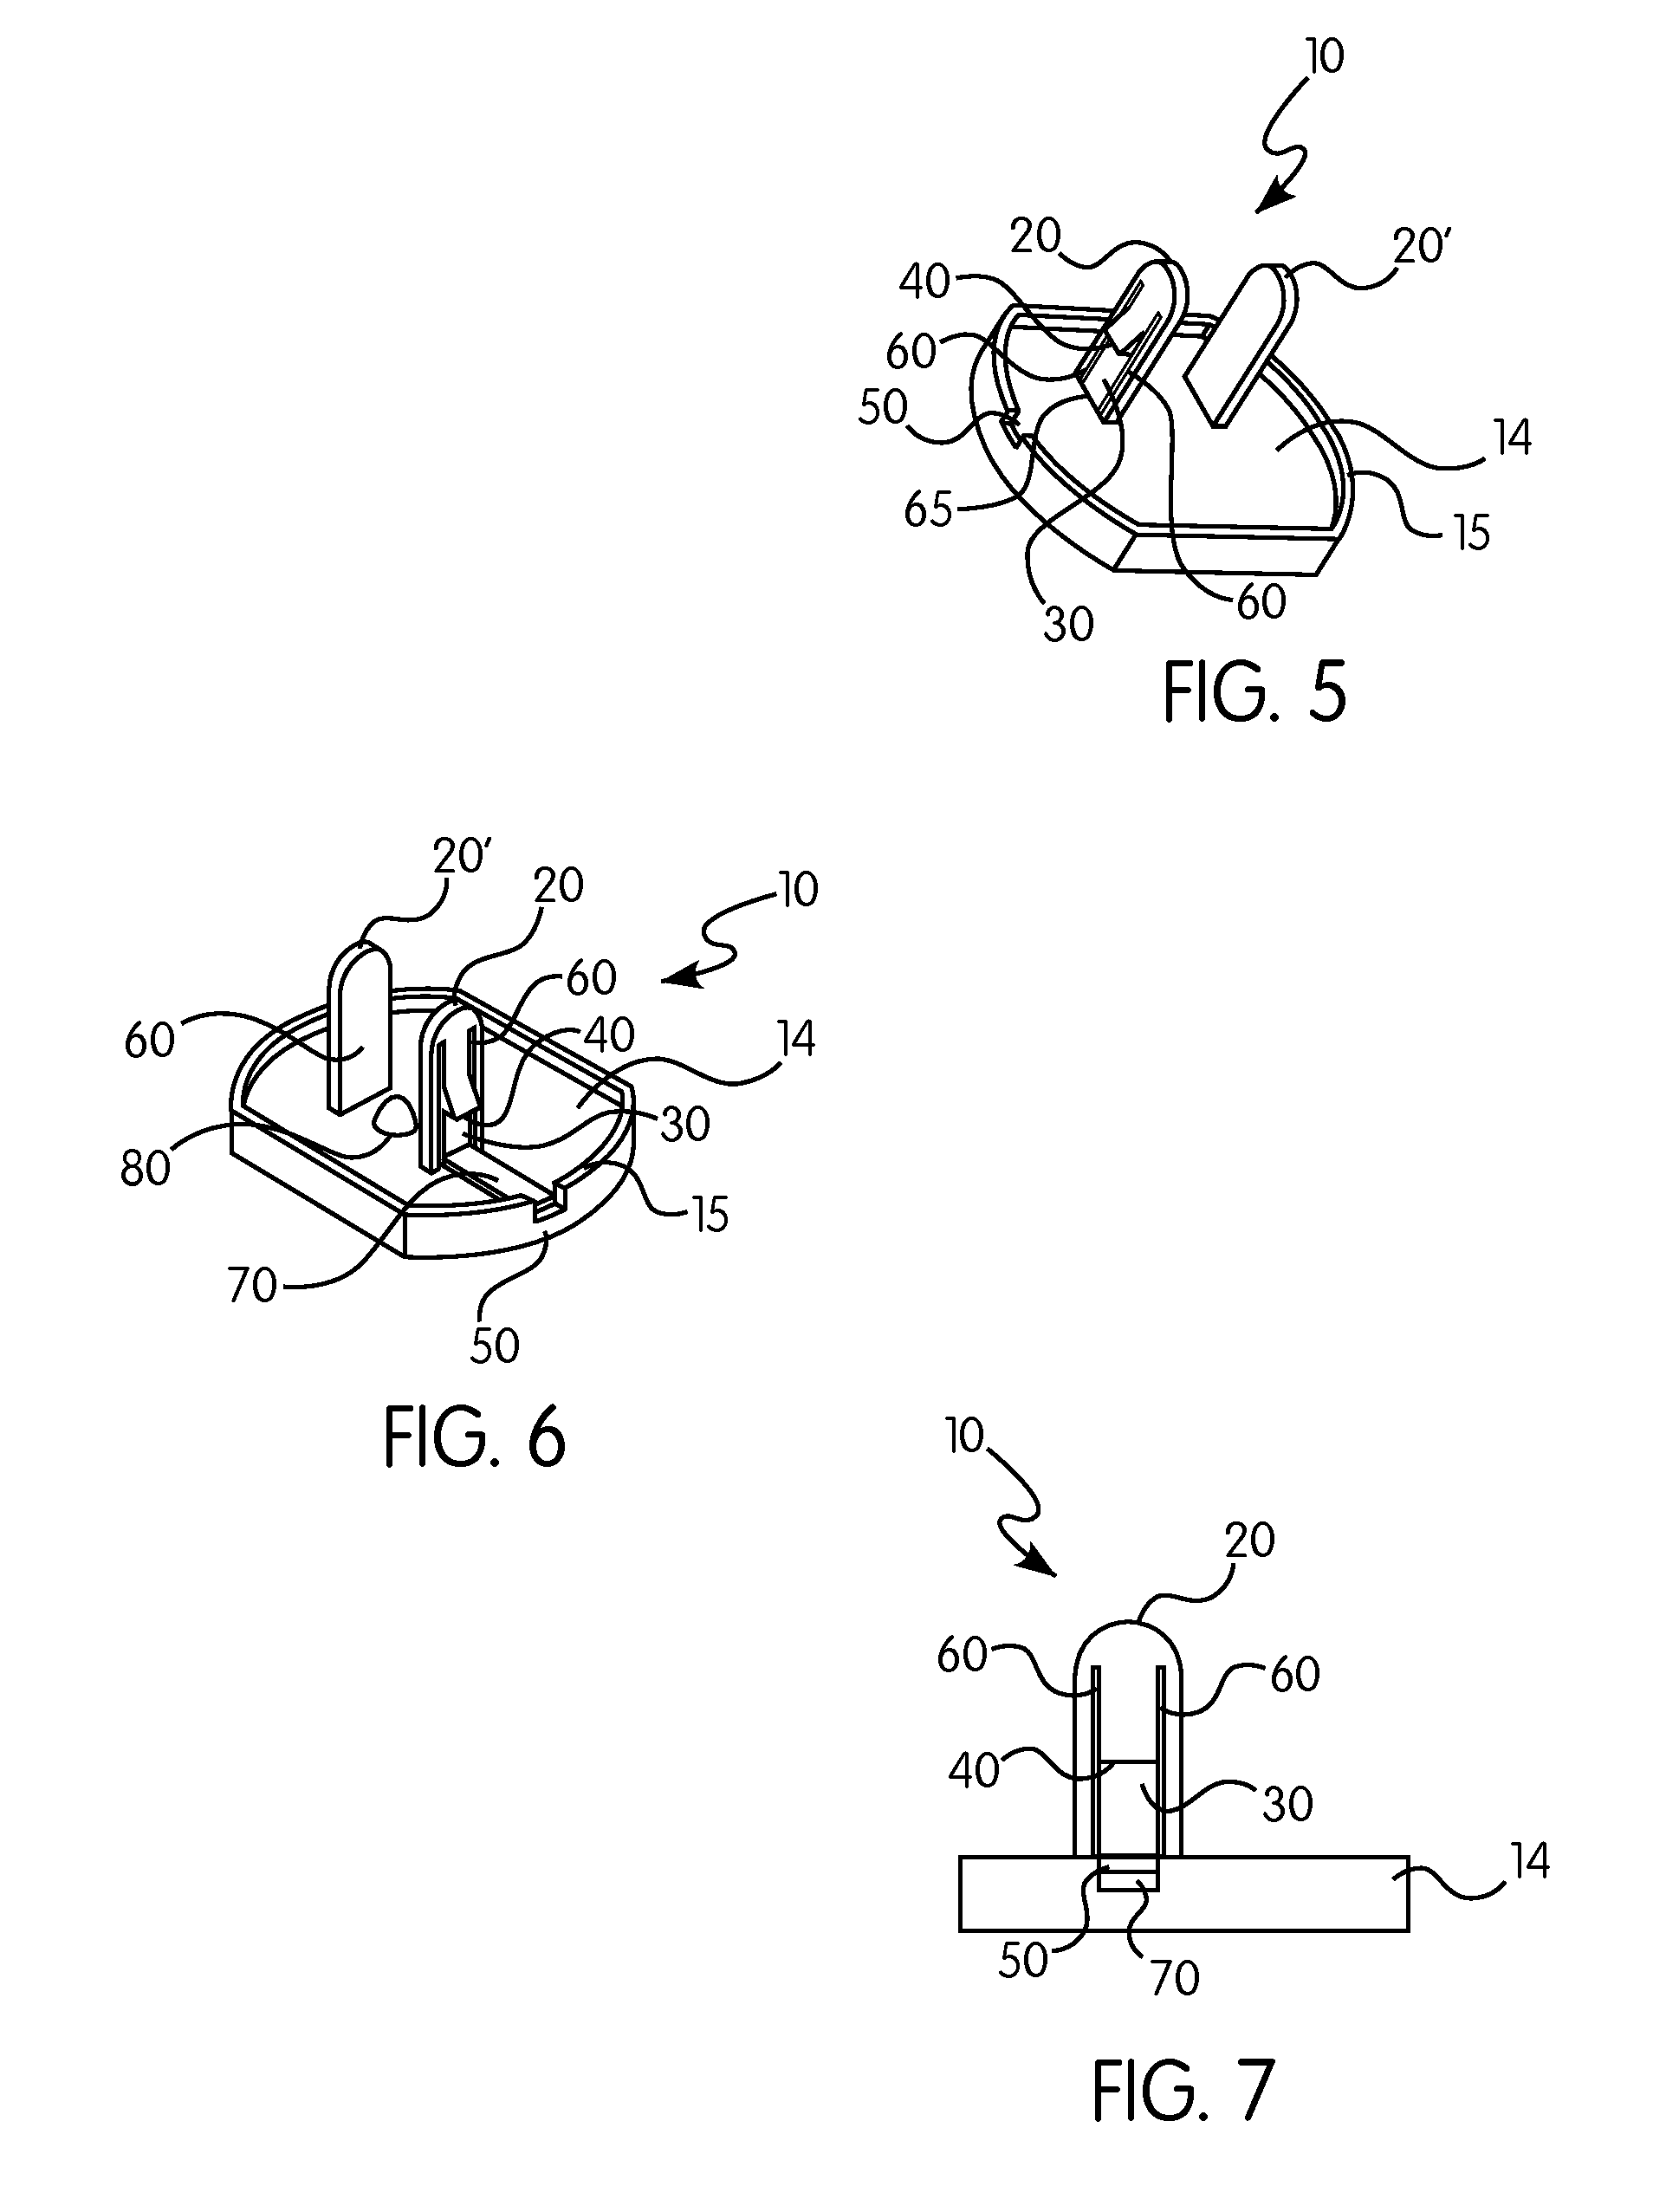 Self Retained Electrical Device Having Positive Locking Mechanism